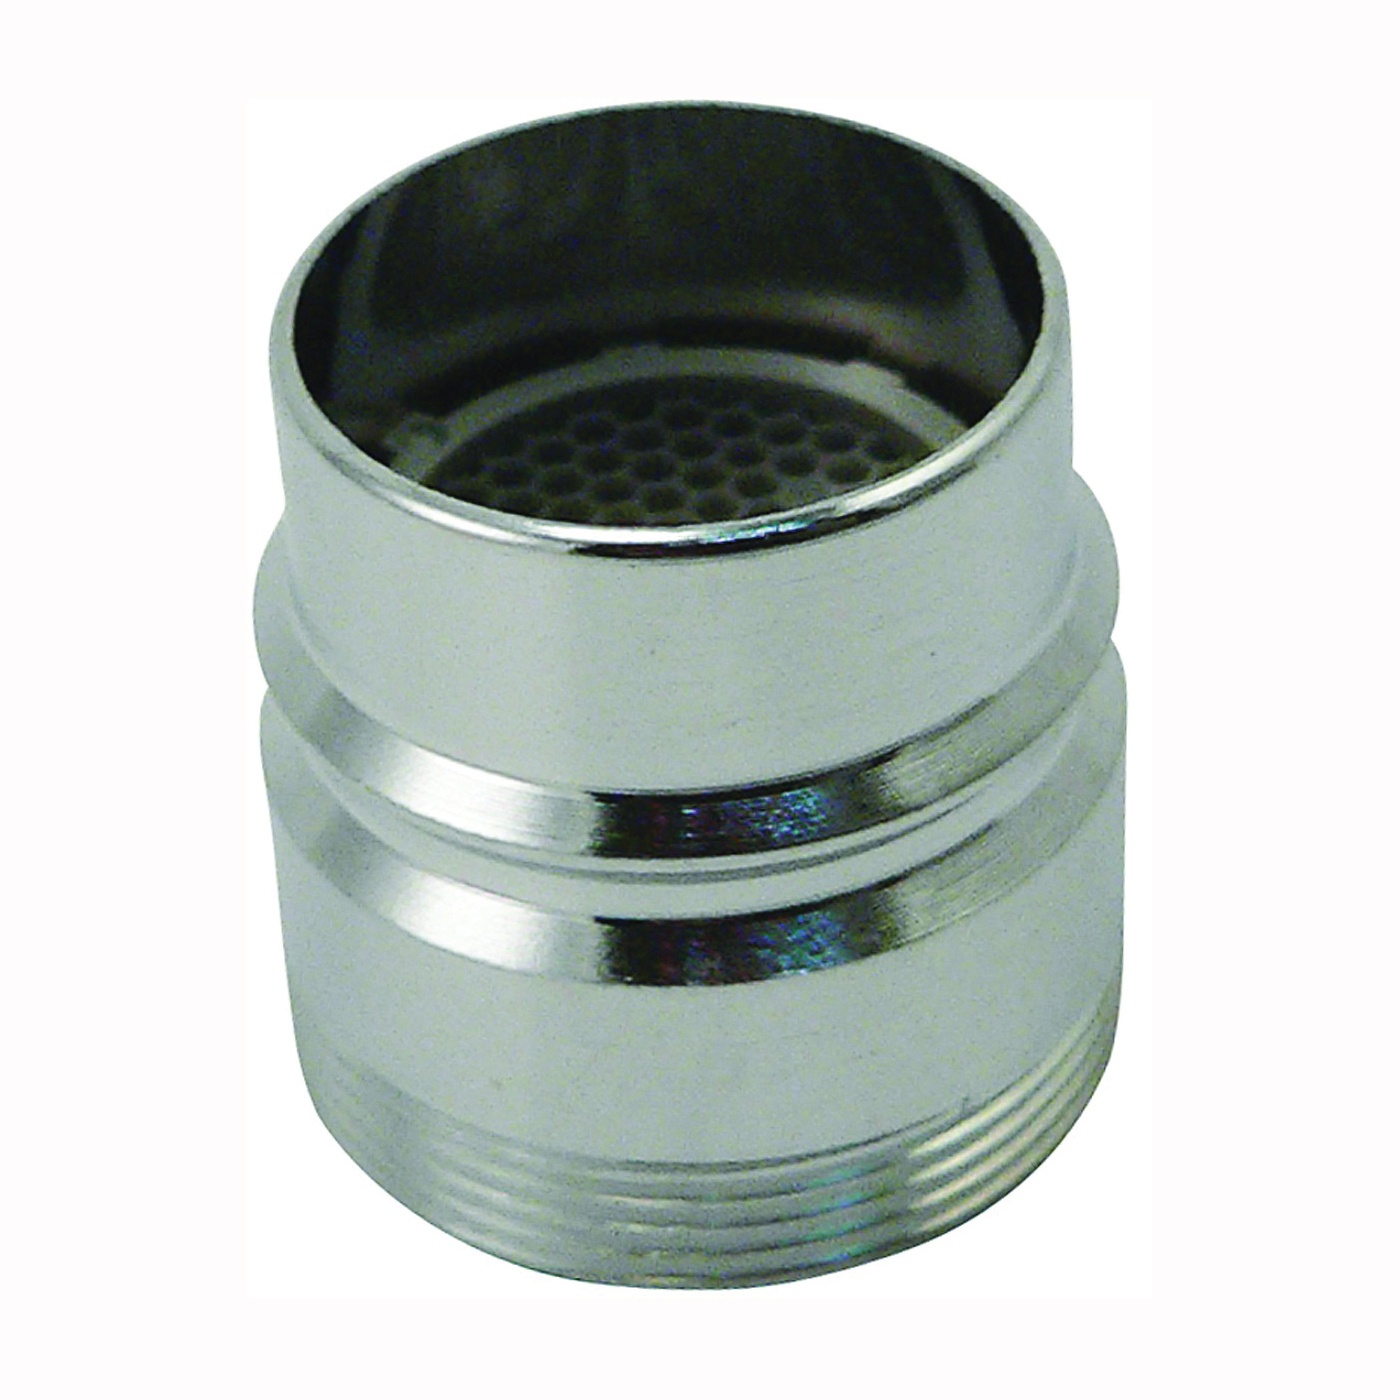 PP28003 Faucet Aerator Adapter, 15/16-27 x 55/64 in in, Male/Female, Brass, Chrome Plated